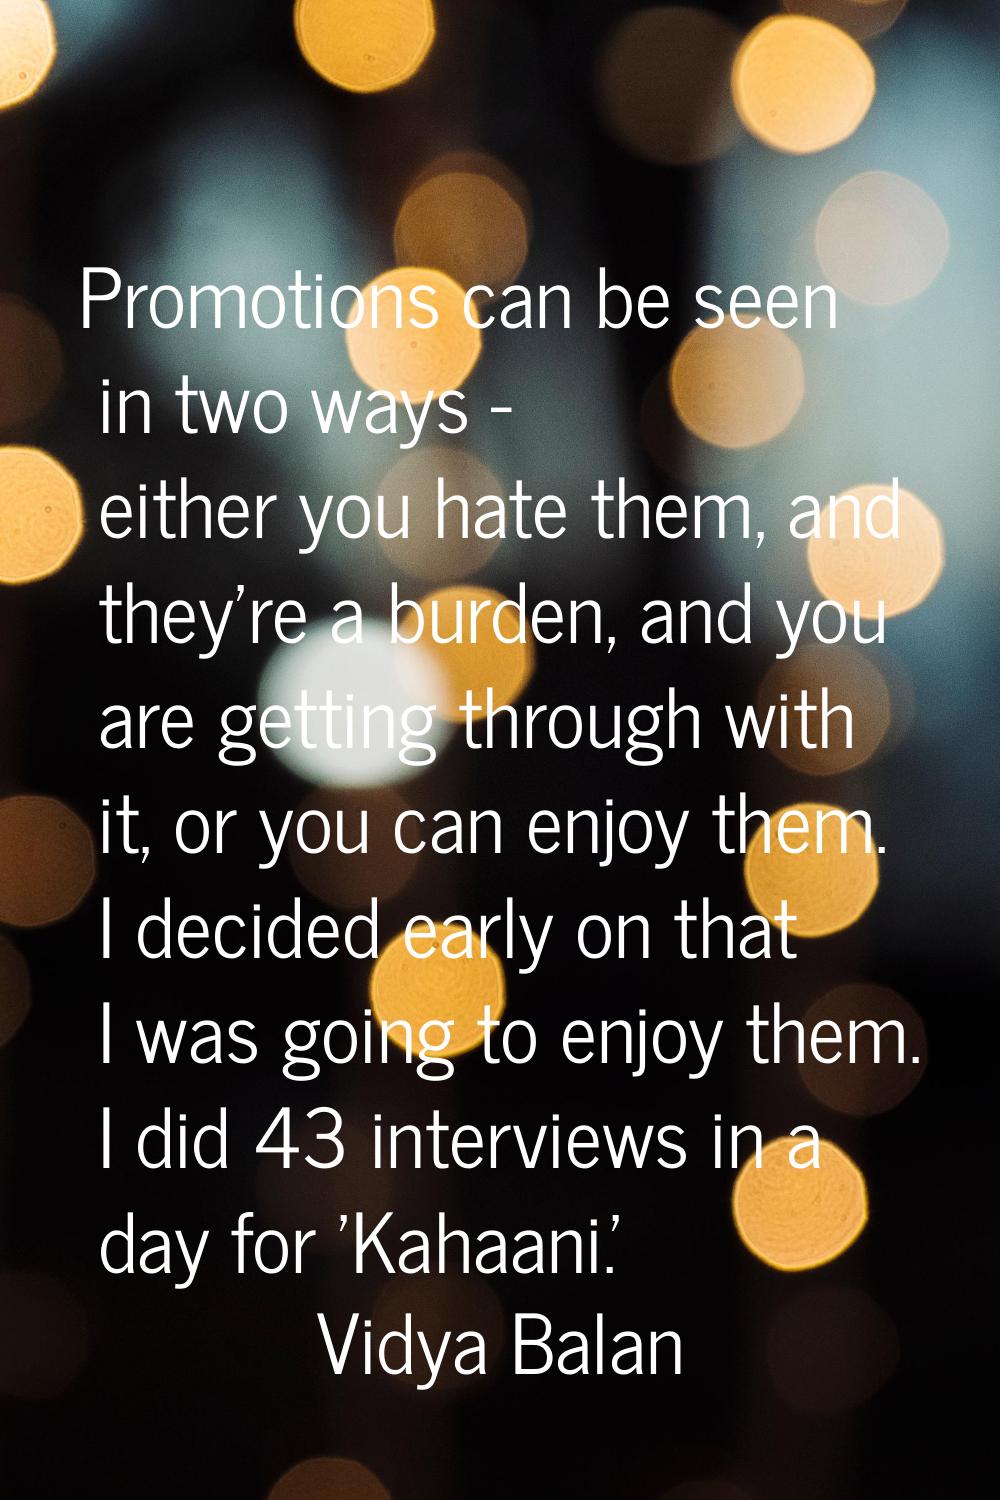 Promotions can be seen in two ways - either you hate them, and they're a burden, and you are gettin